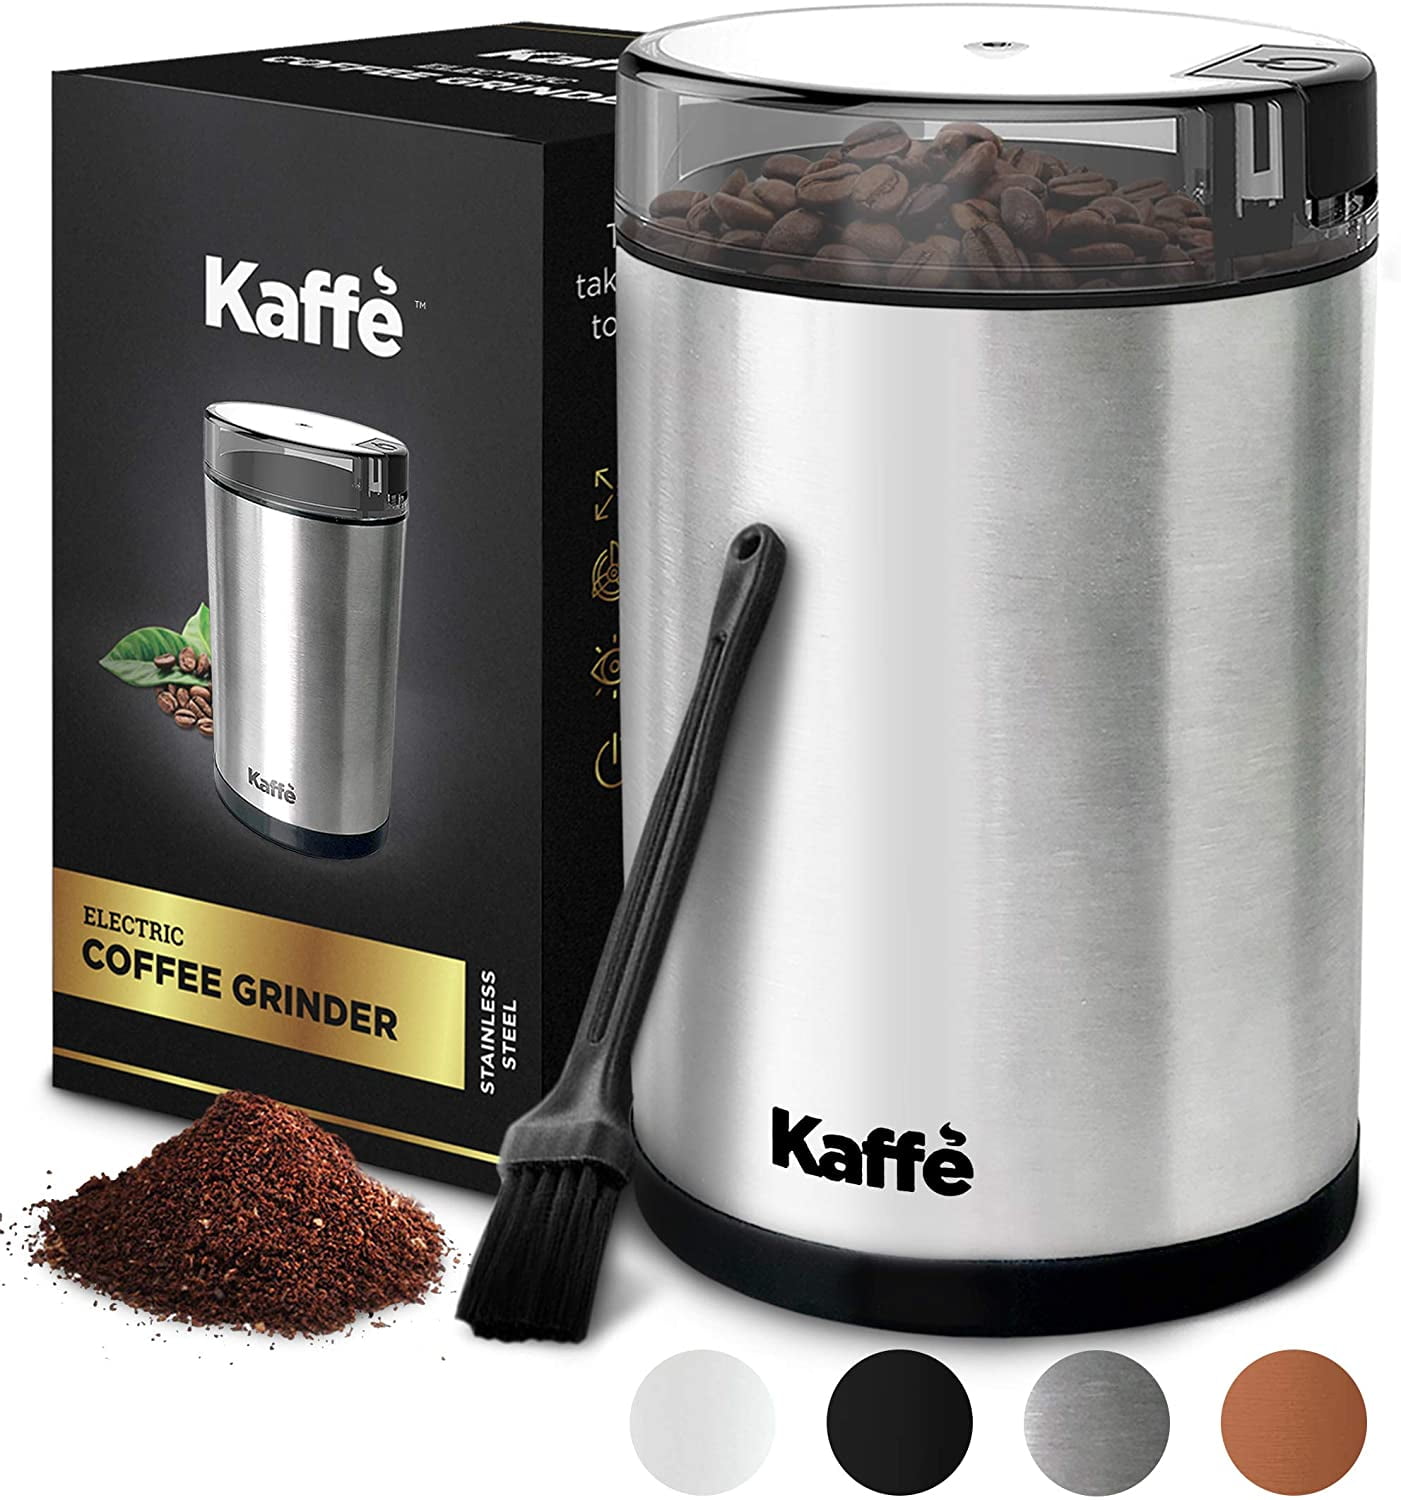 Wirsh Coffee Grinder – Electric Coffee grinder with Stainless